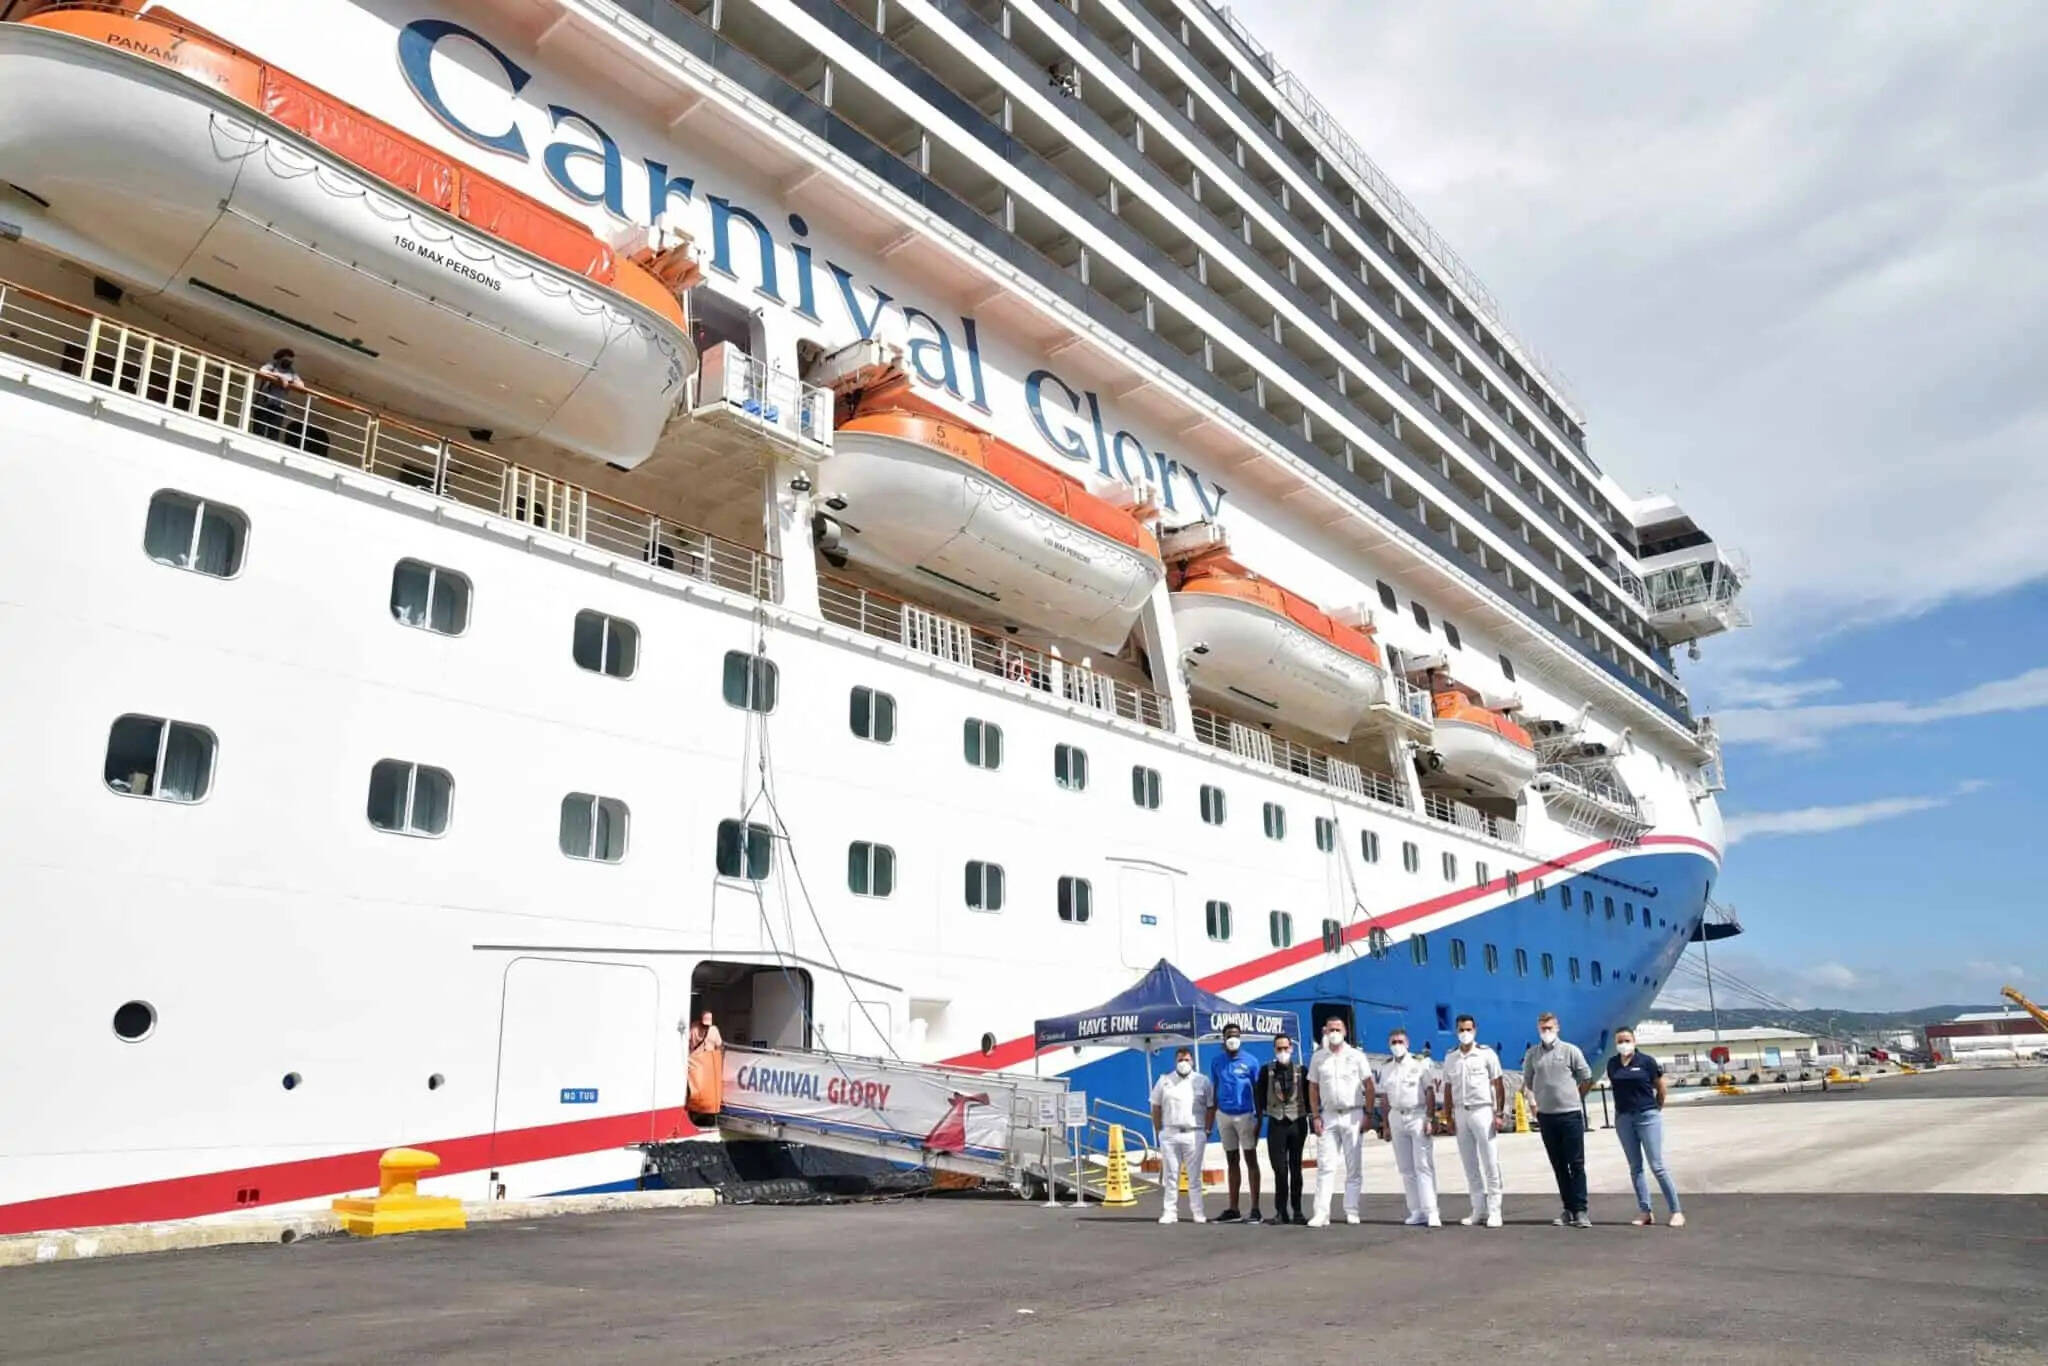 what-carnival-cruise-goes-to-jamaica